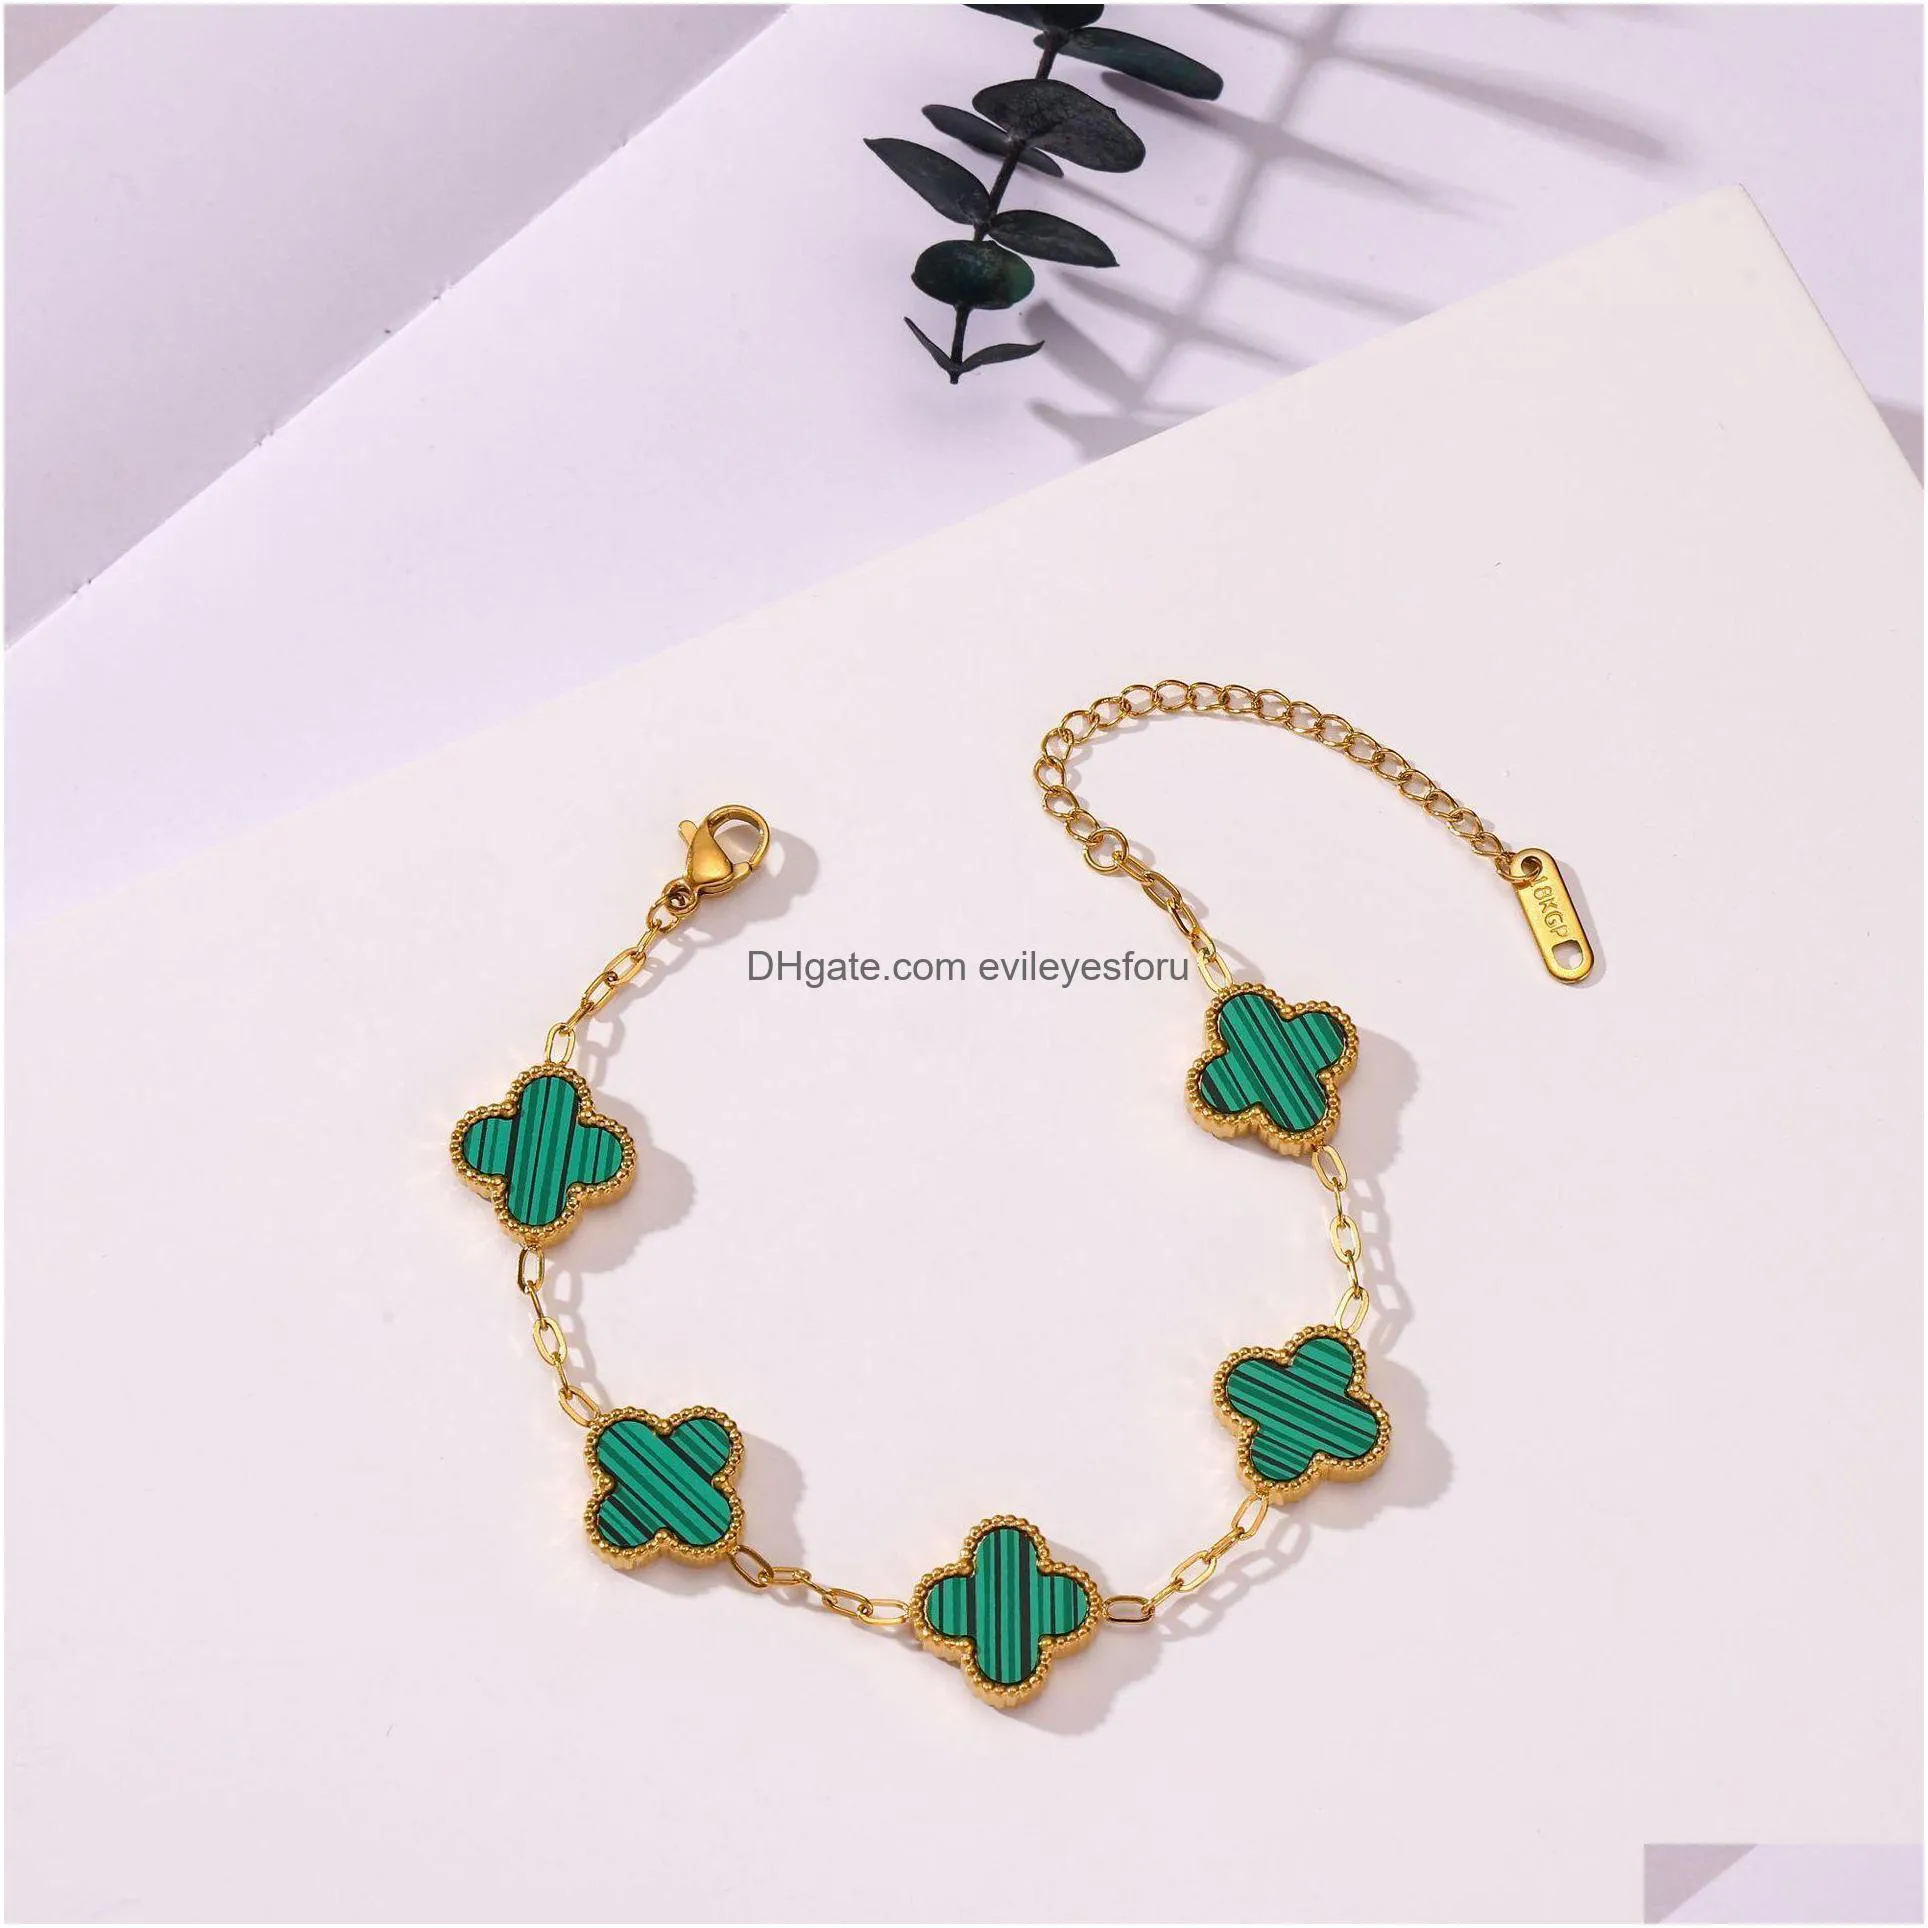 everyones favorite clover bracelet fashion jewelry colorful four-leaf clover bracelet lucky simple light luxury 18k gold plated girl gift